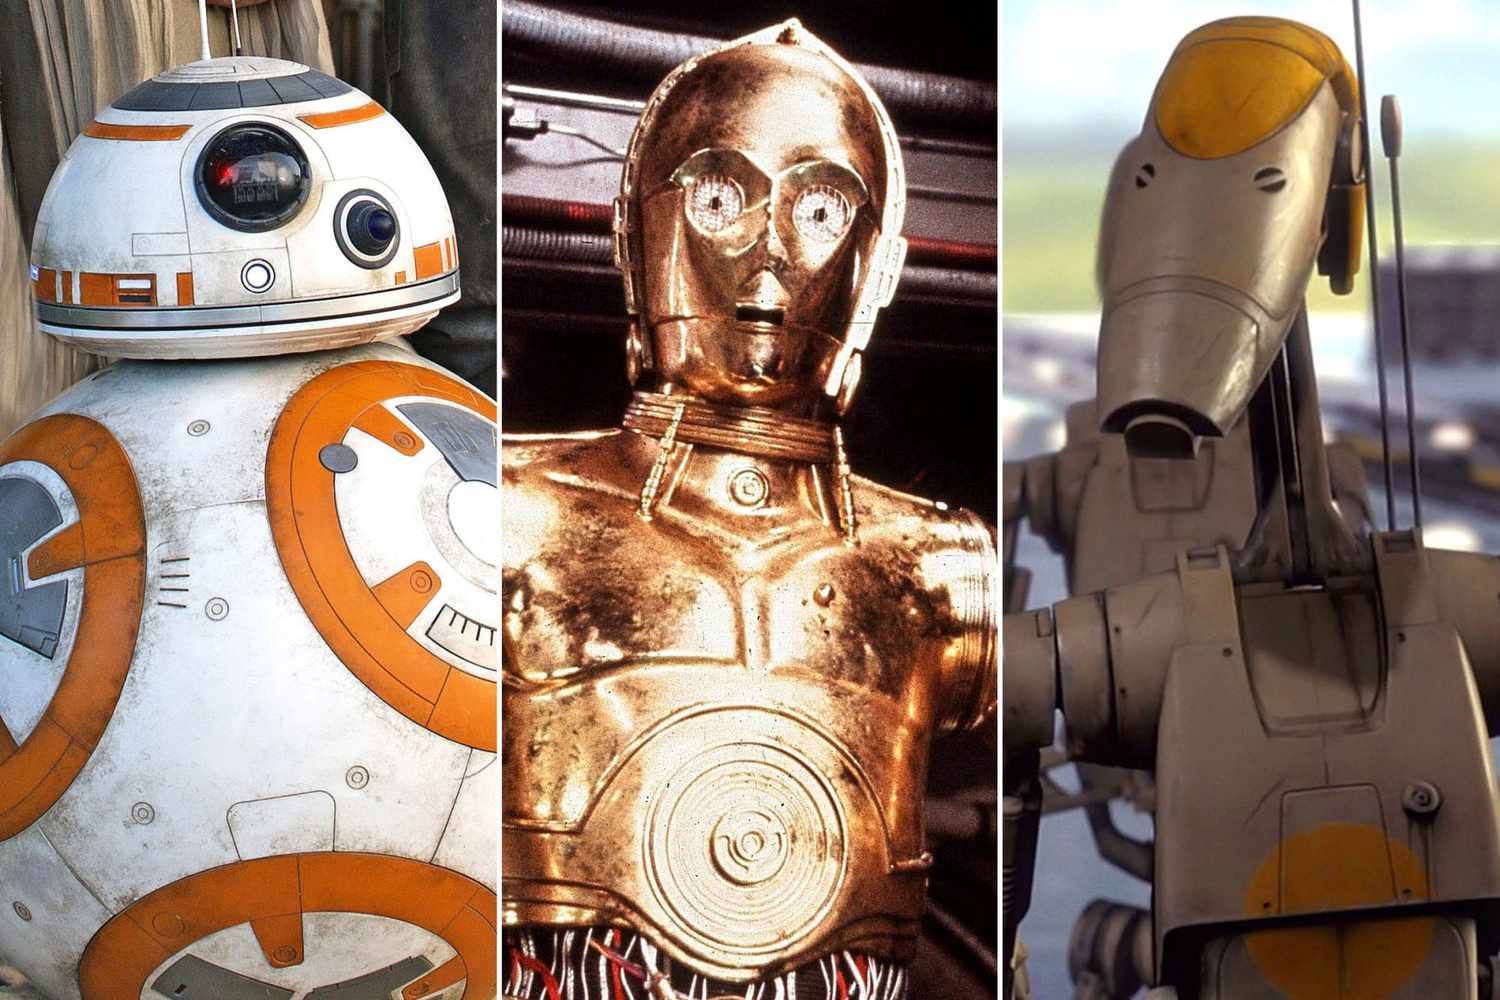 The Best Droids Of The Star Wars Universe Ranked Ew Com